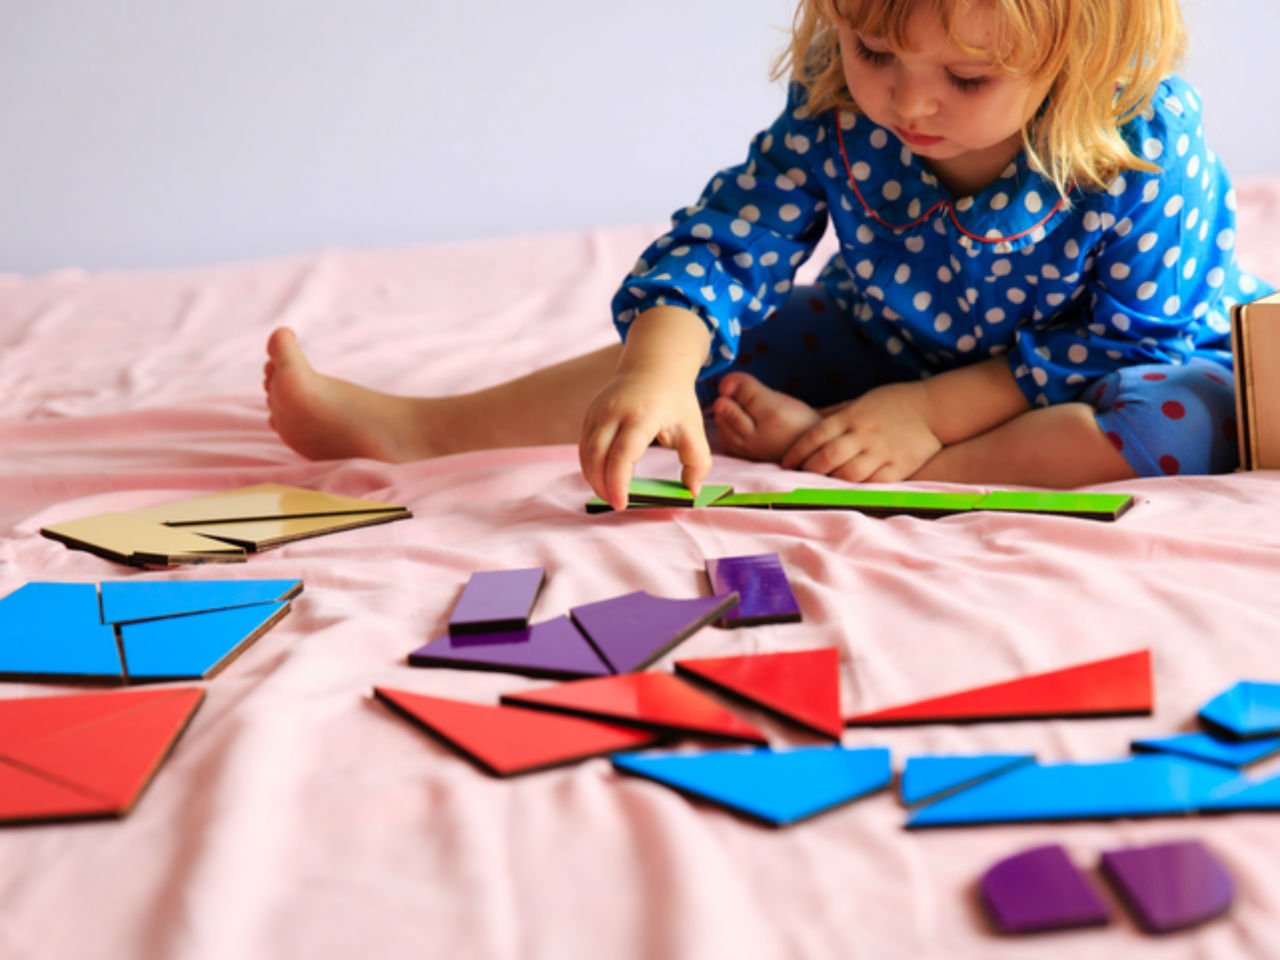 10 Fun And Educational Games To Play With Toddlers